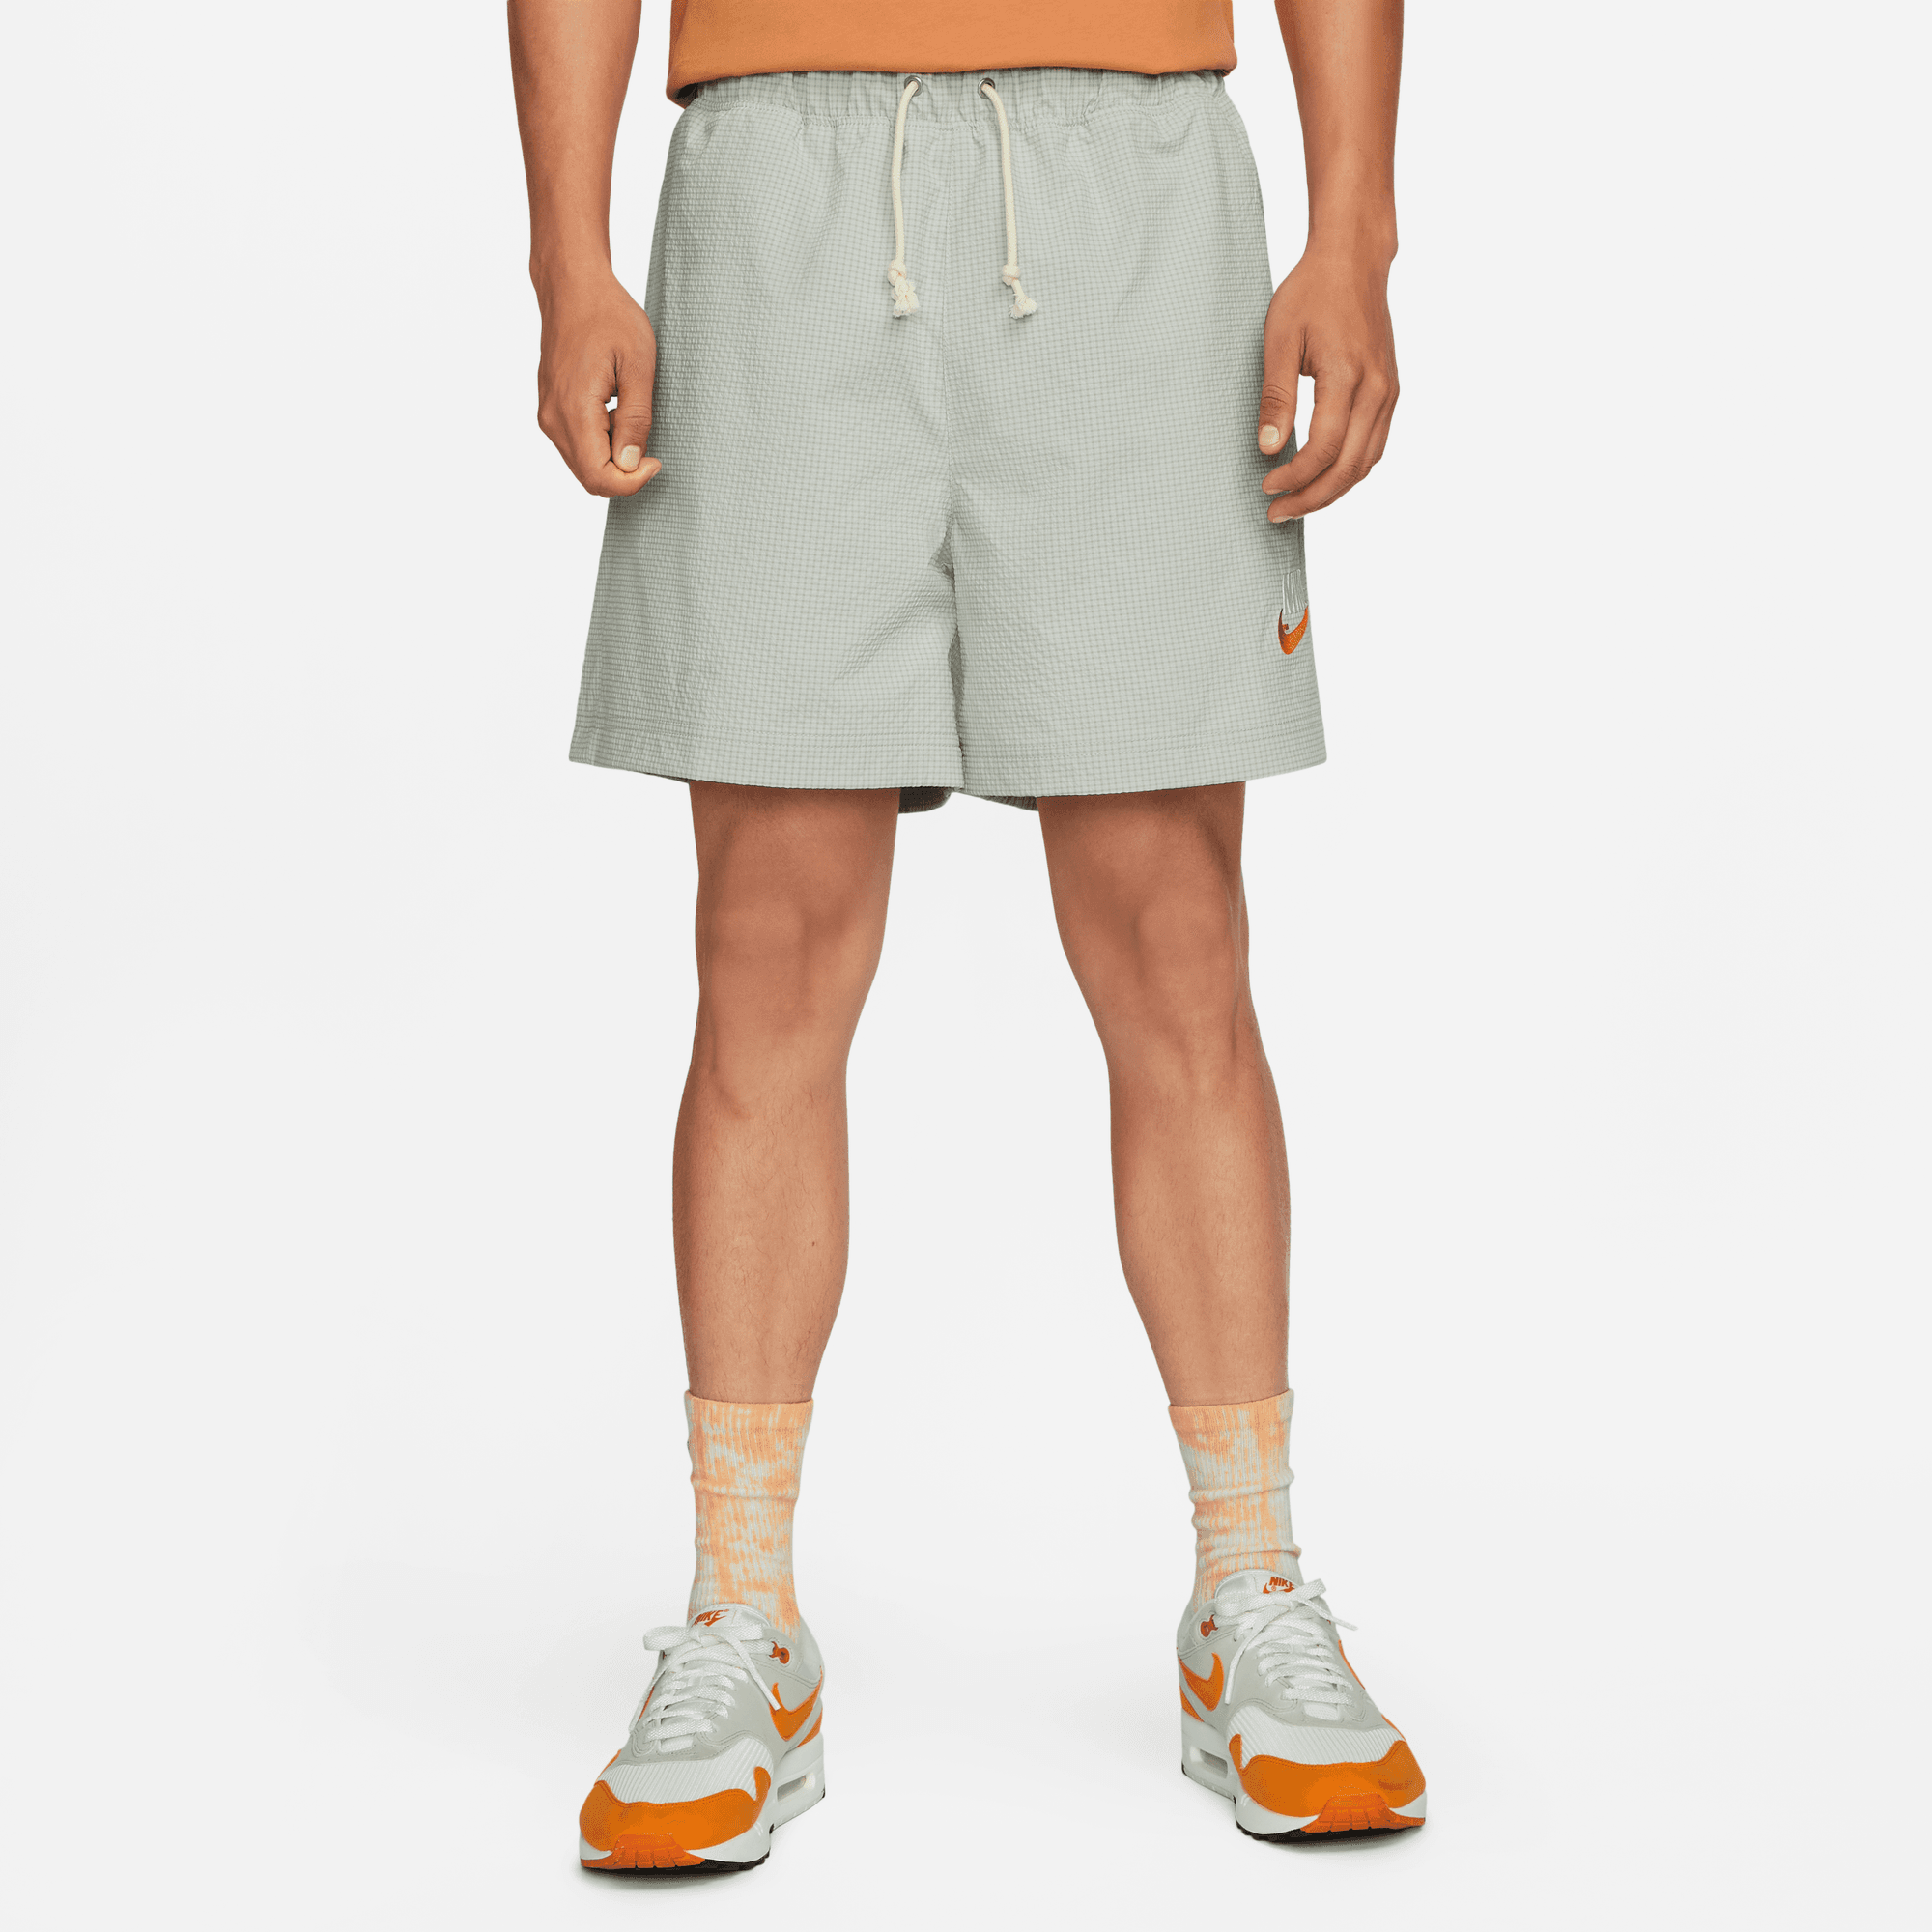 NSW Lined Woven Shorts DM5281-012 Grey